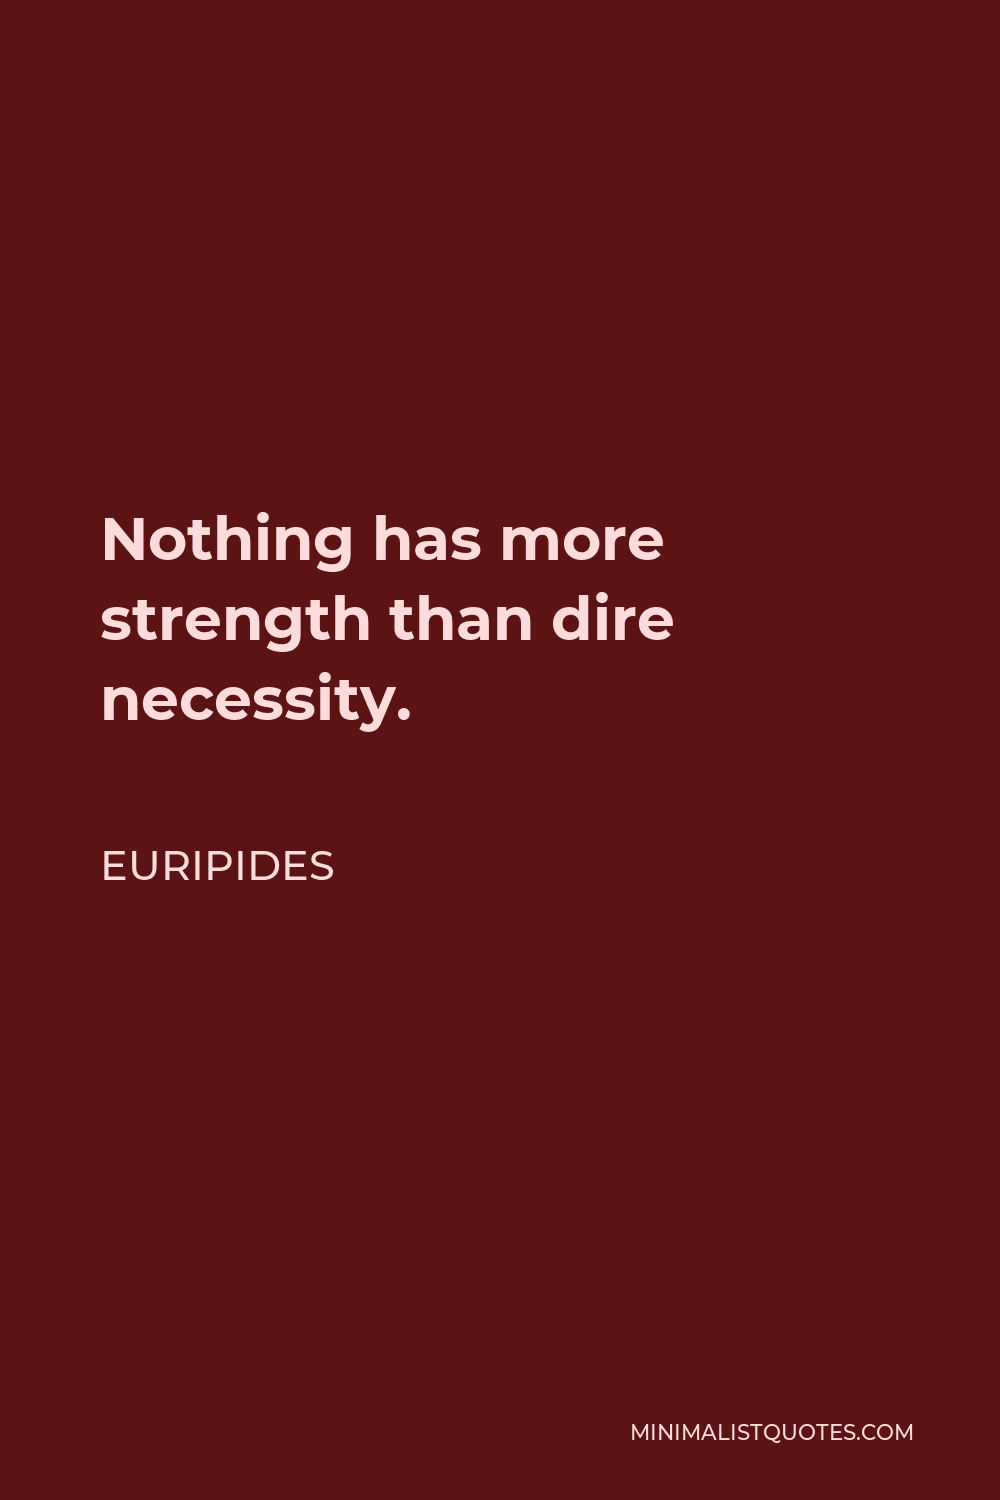 Euripides Quote - Nothing has more strength than dire necessity.